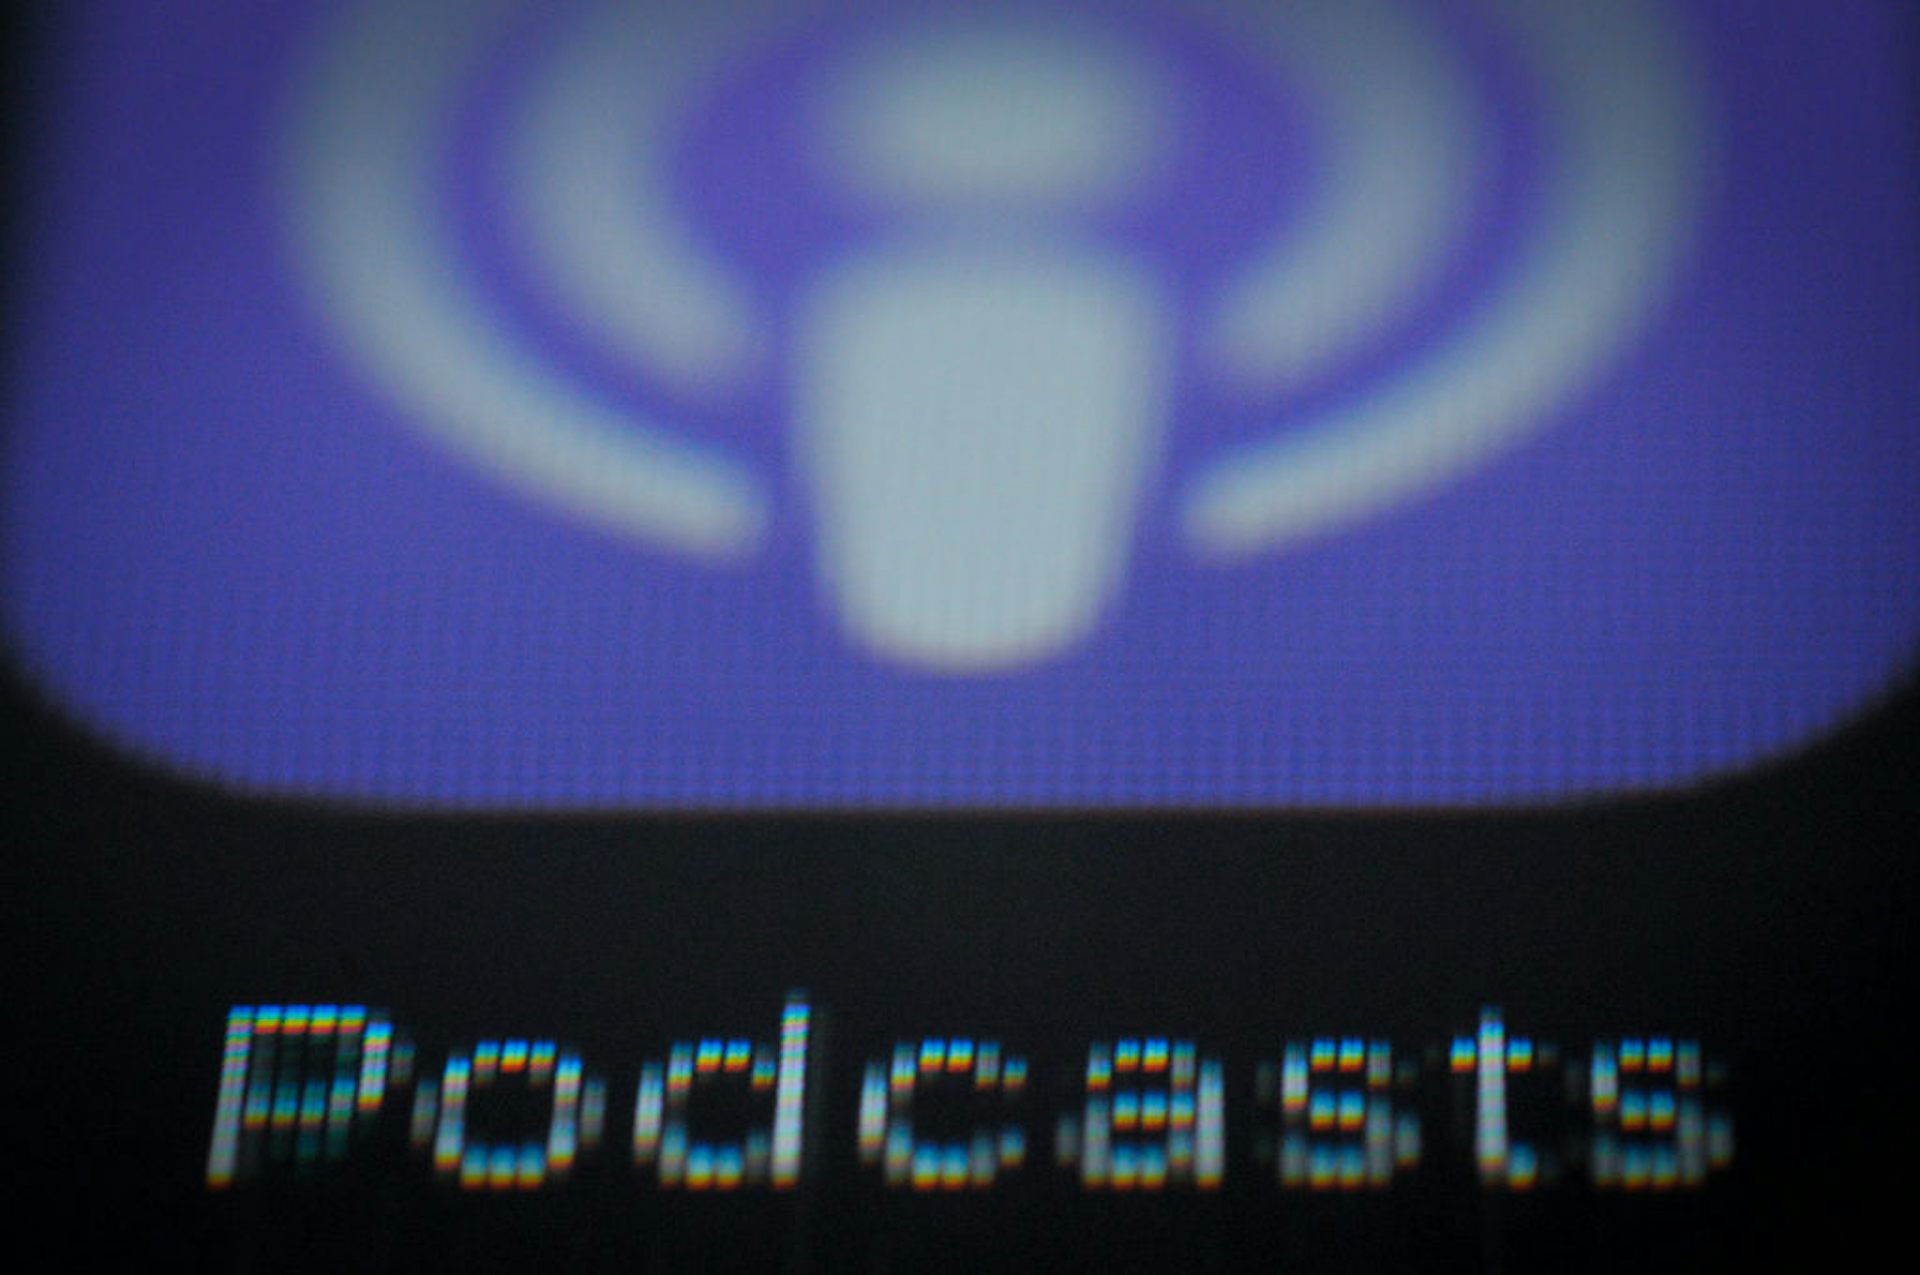 Apple threatens to upend podcasting’s free, open architecture - Podcast Studies